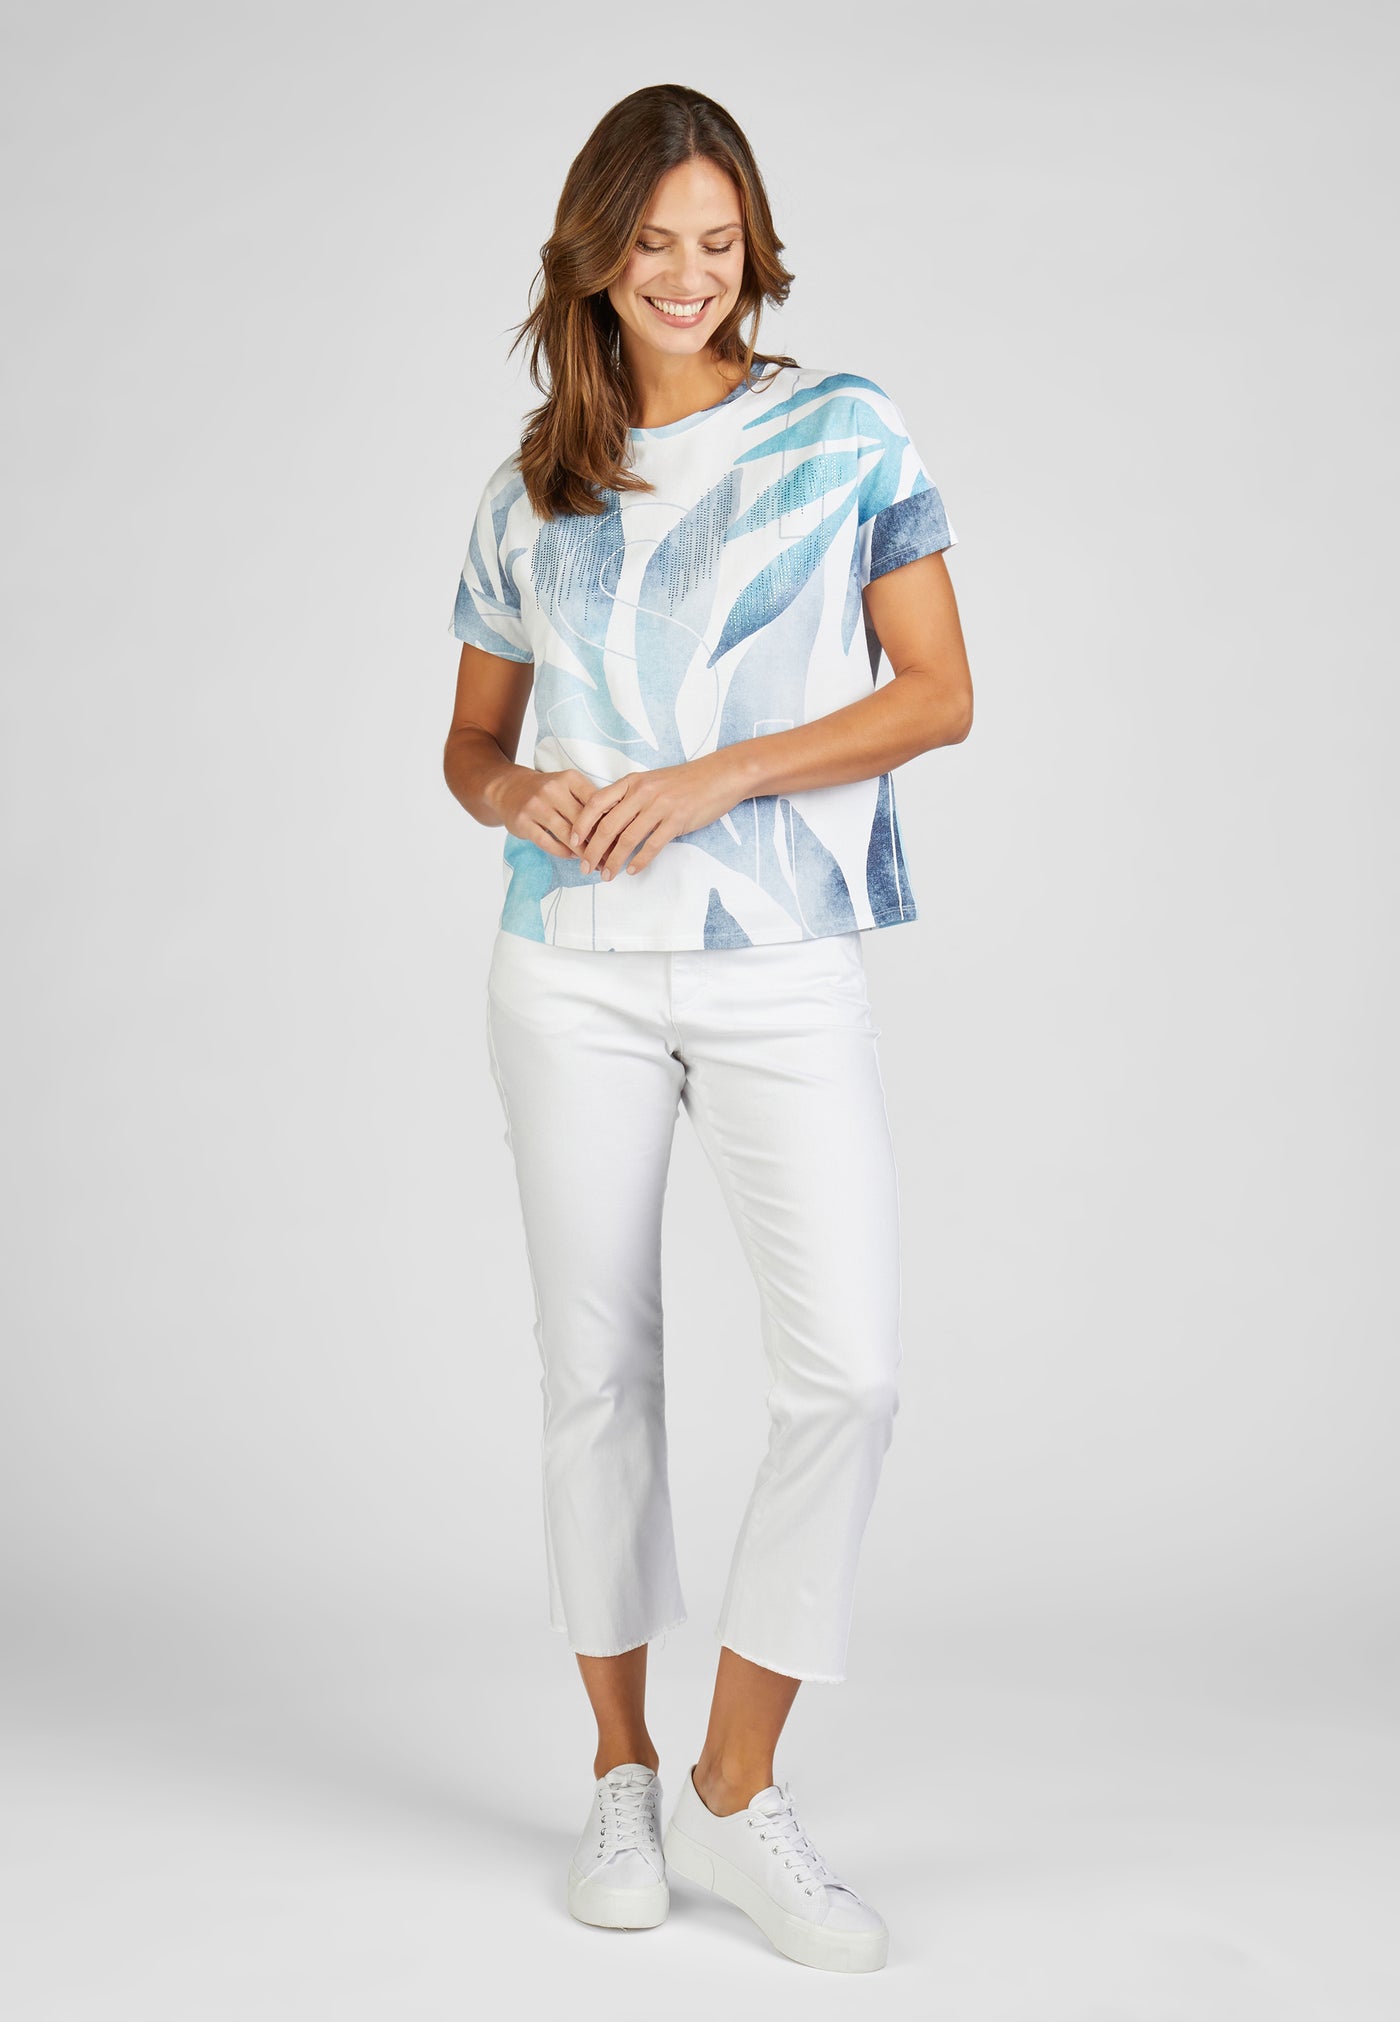 Blue & White 'Salty Breeze' Top with Short Sleeve & Diamante Detailing